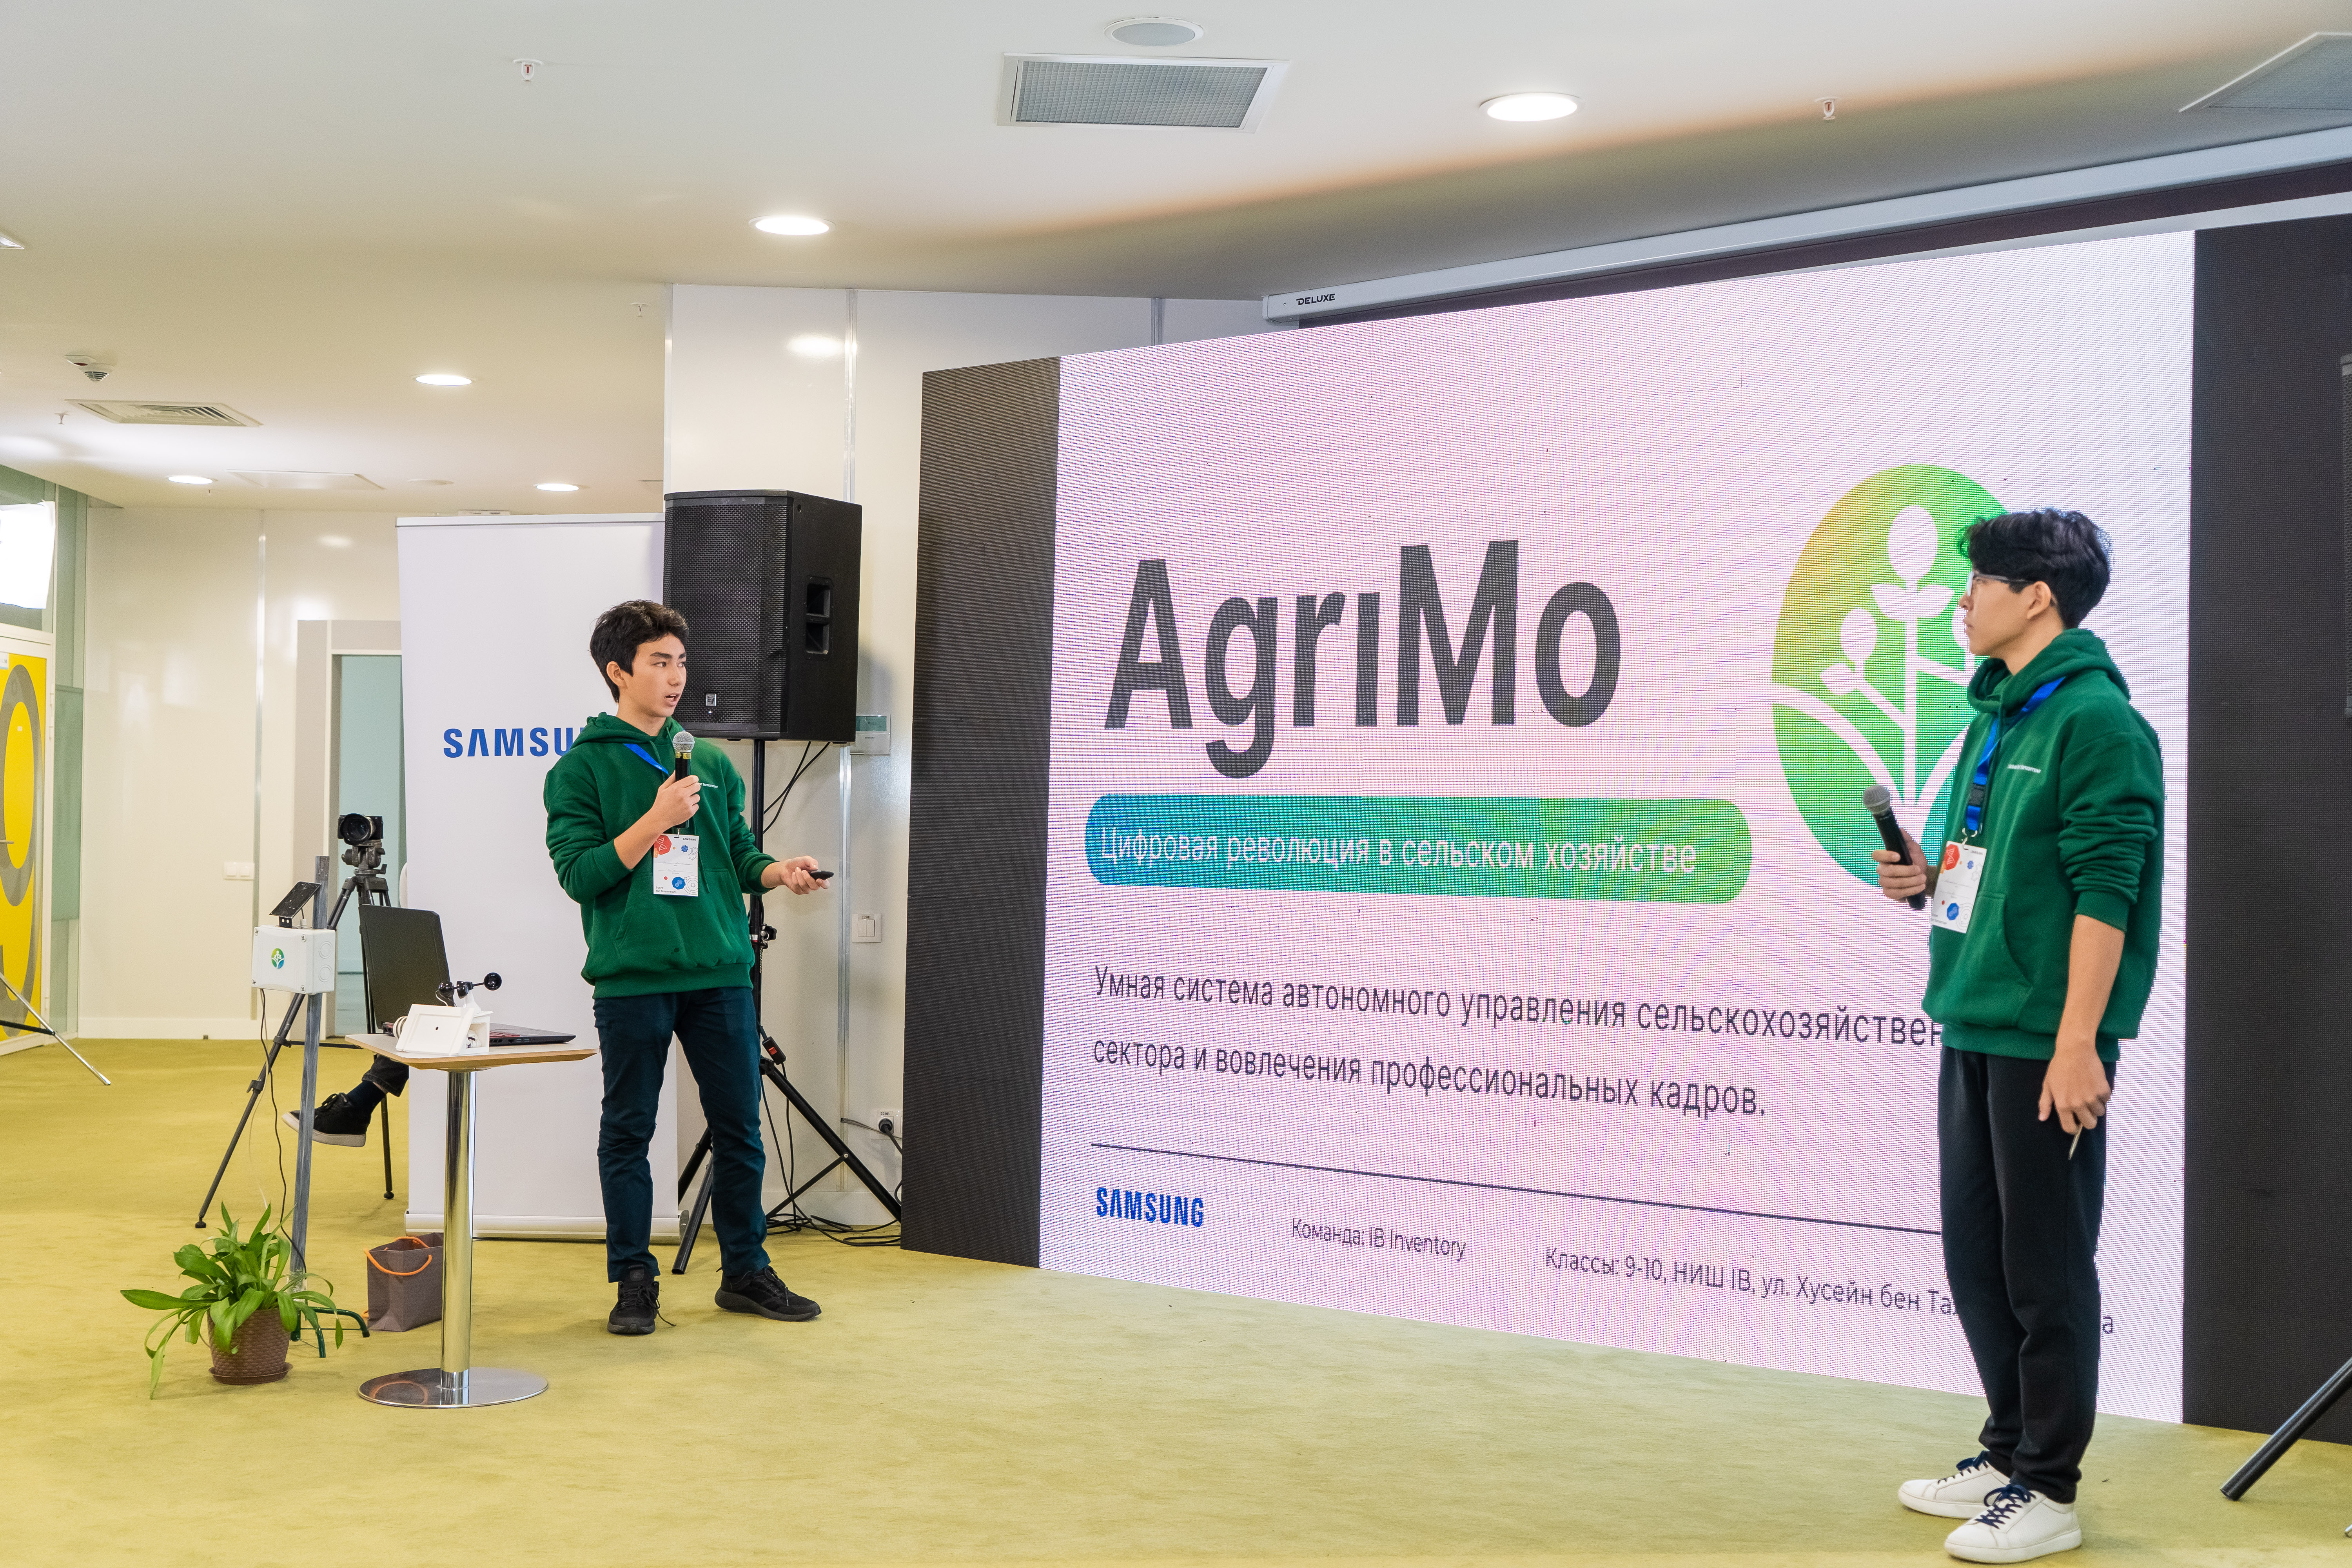 AgriMo